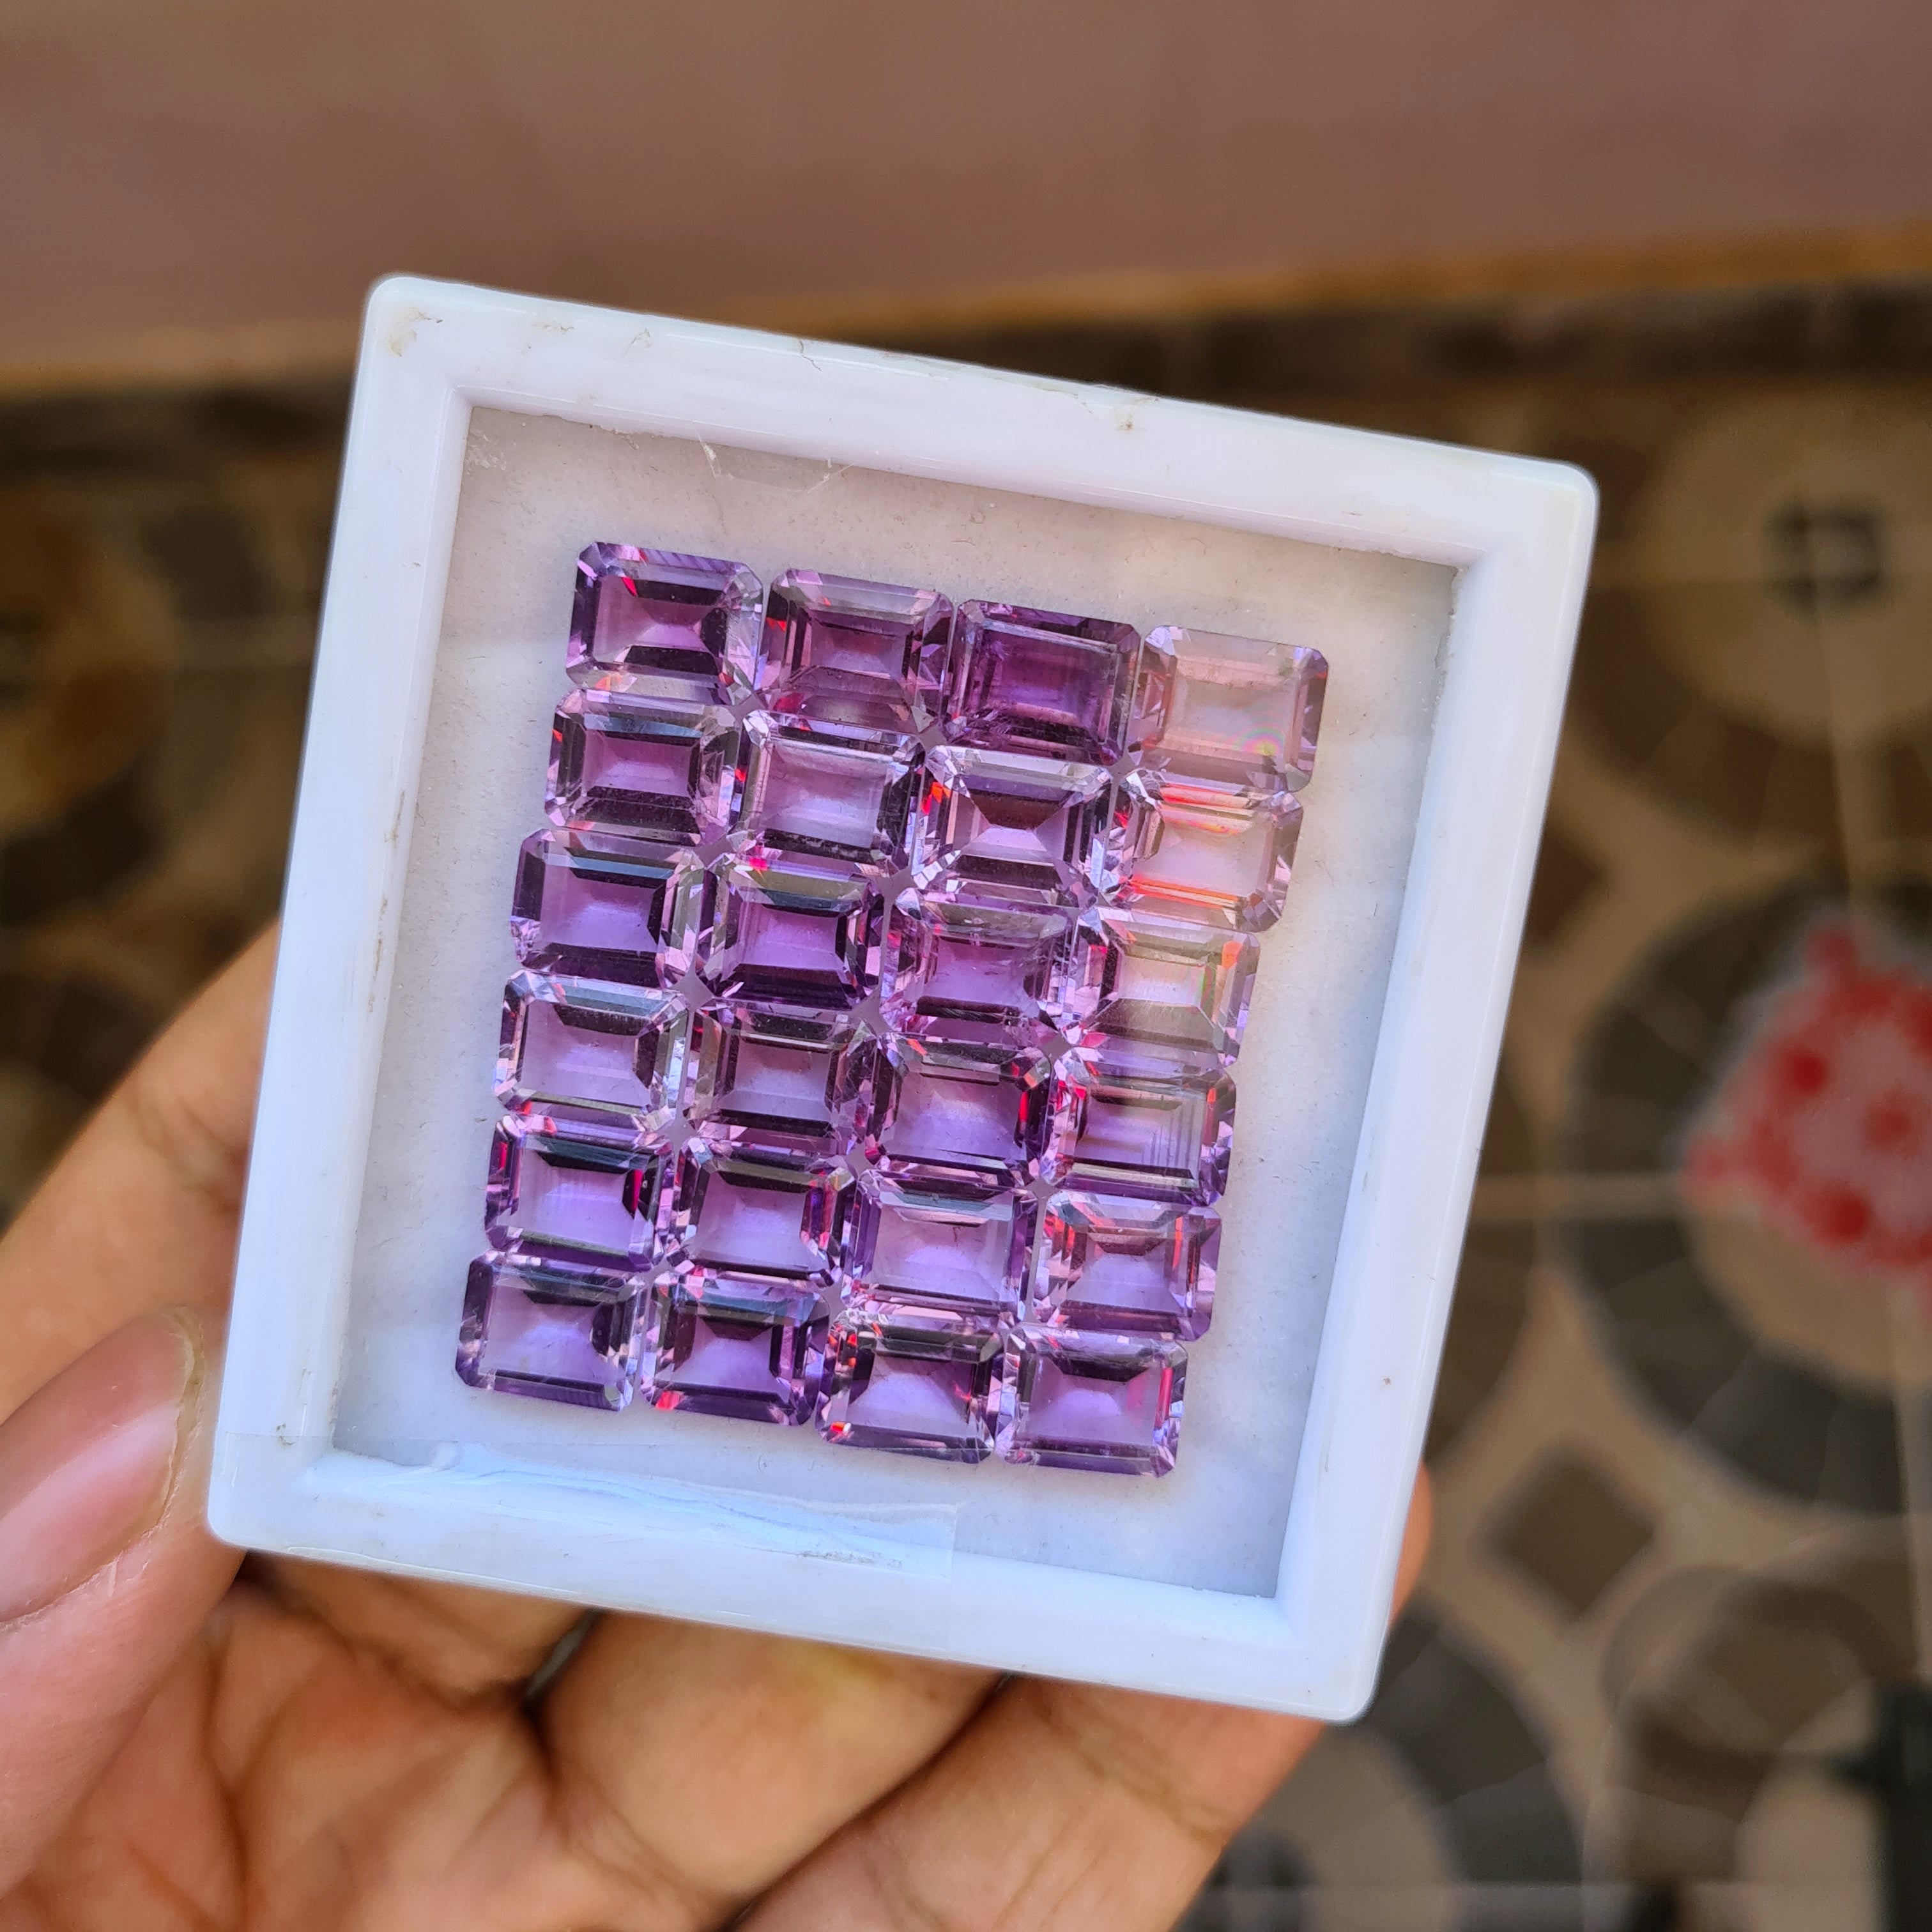 20 Pcs Natural Amethyst Rectangle Shape Faceted cut Loose Gemstone Size: 9x7mm, Natural Amethyst Faceted Cut Stone - The LabradoriteKing